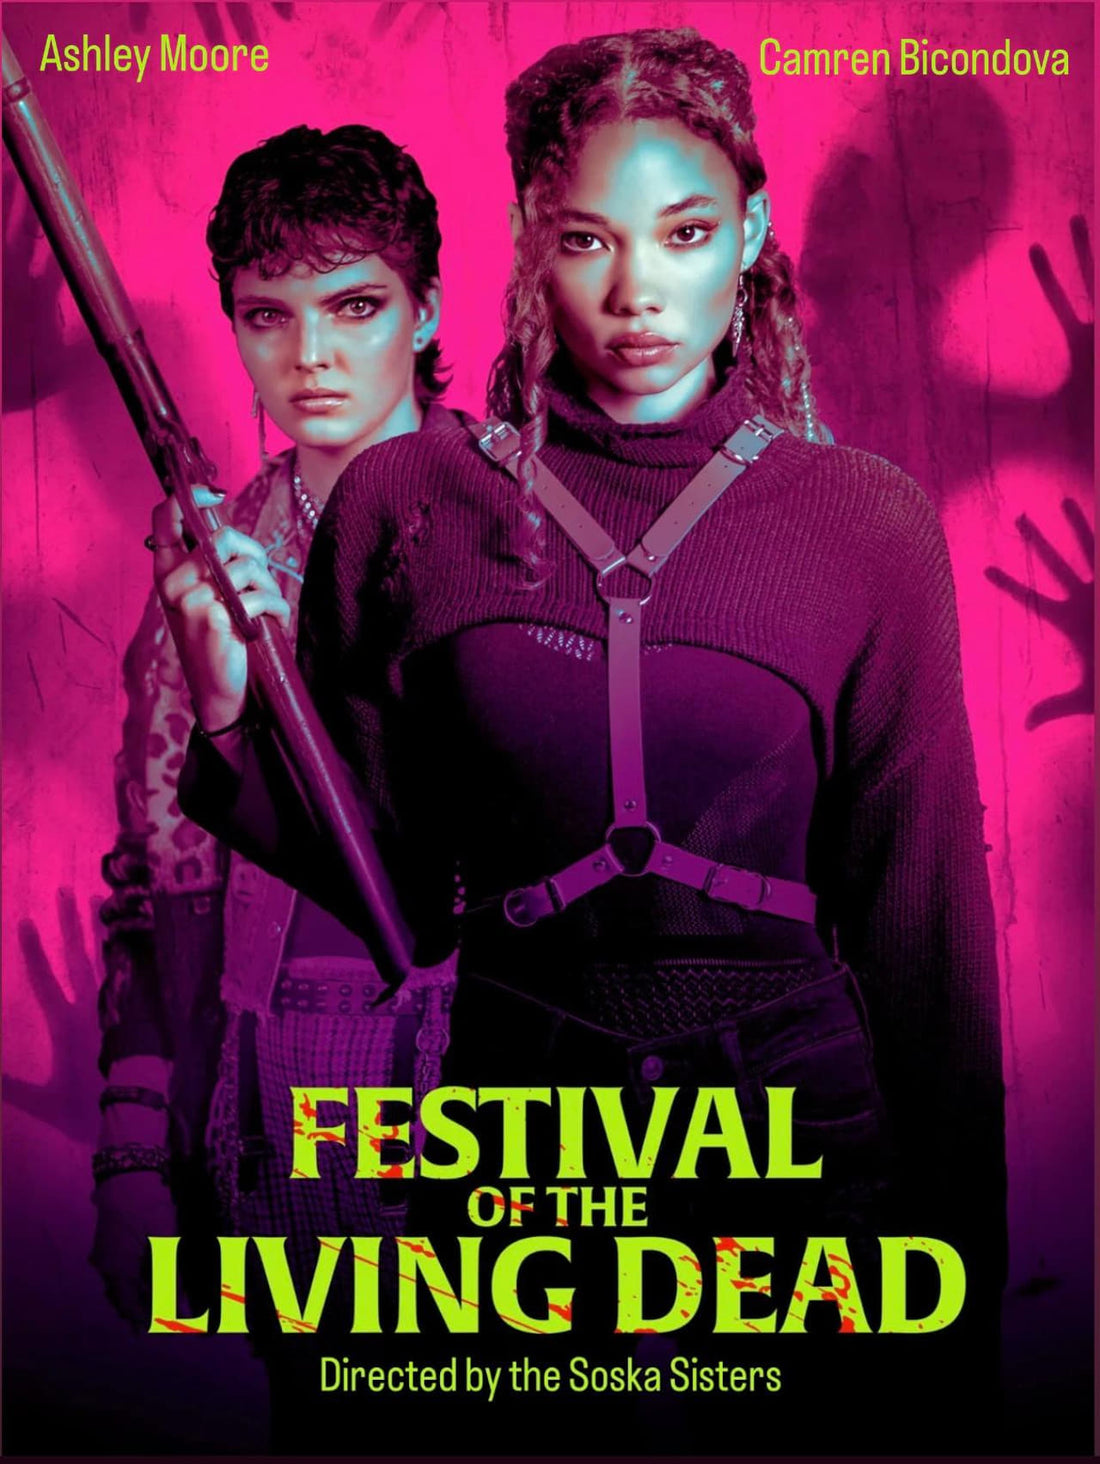 Where to watch Festival of the Living Dead